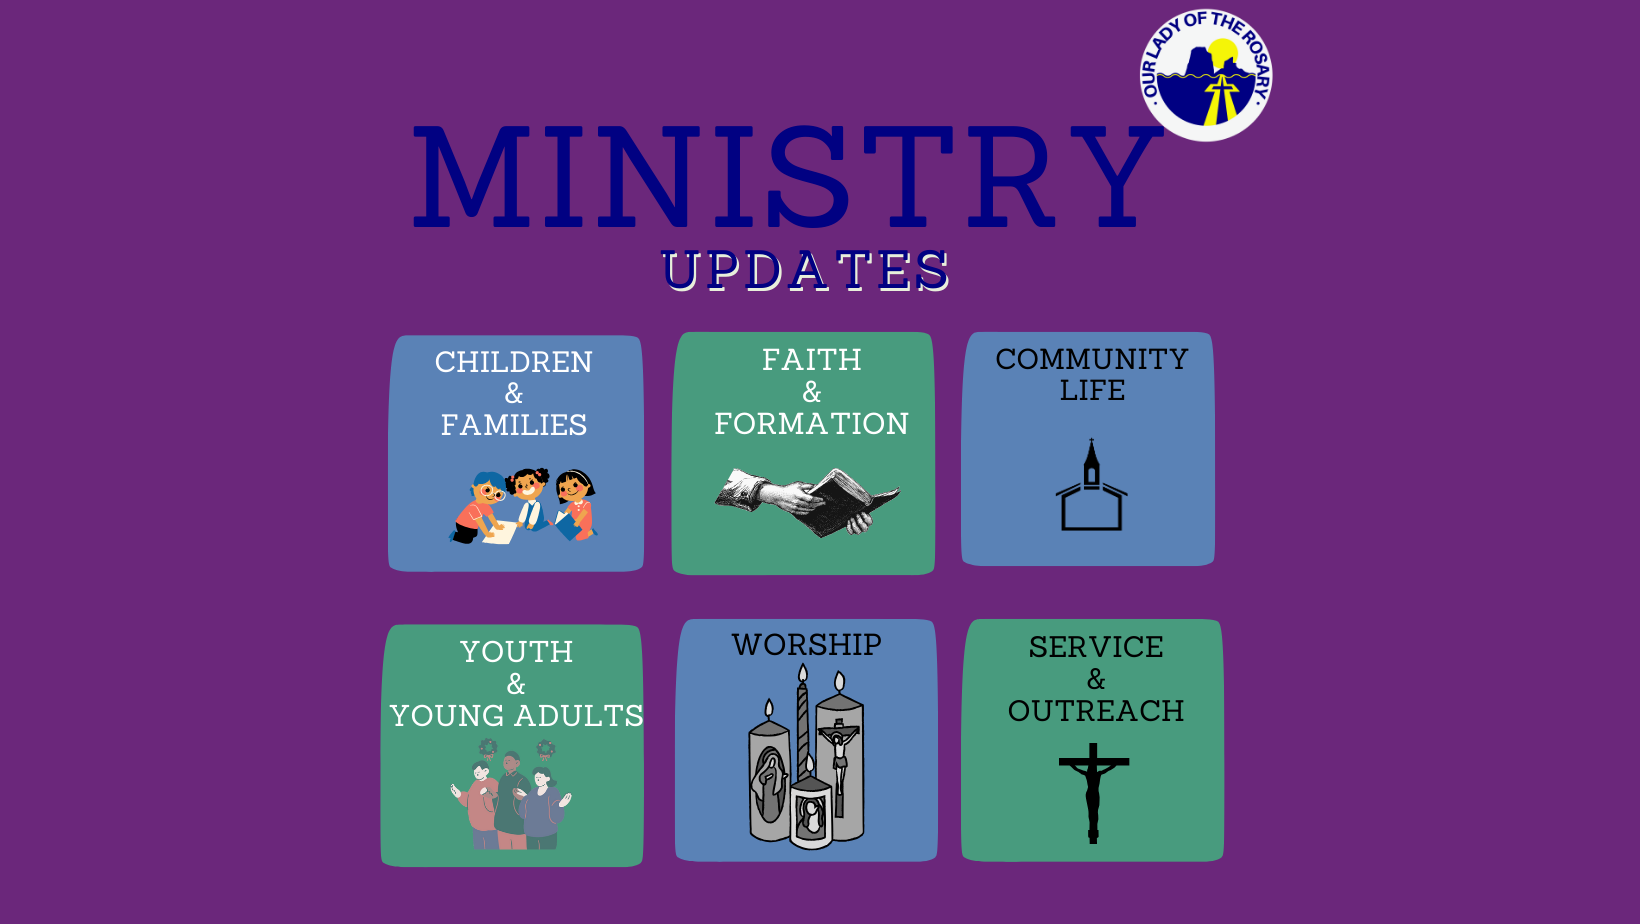 Ministry updates - during LENT